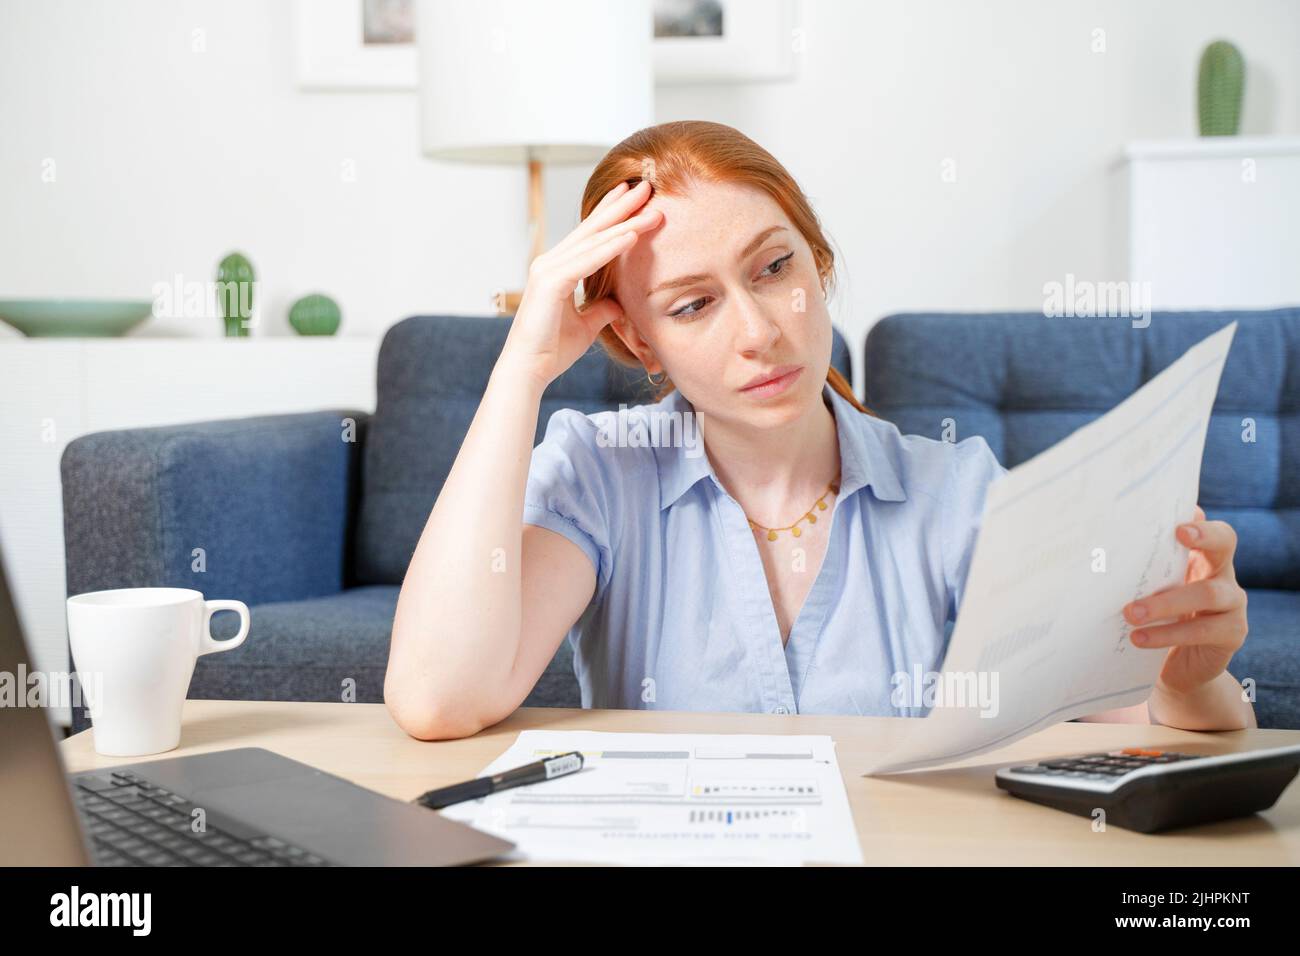 Woman working through papers and calculating home budget Stock Photo